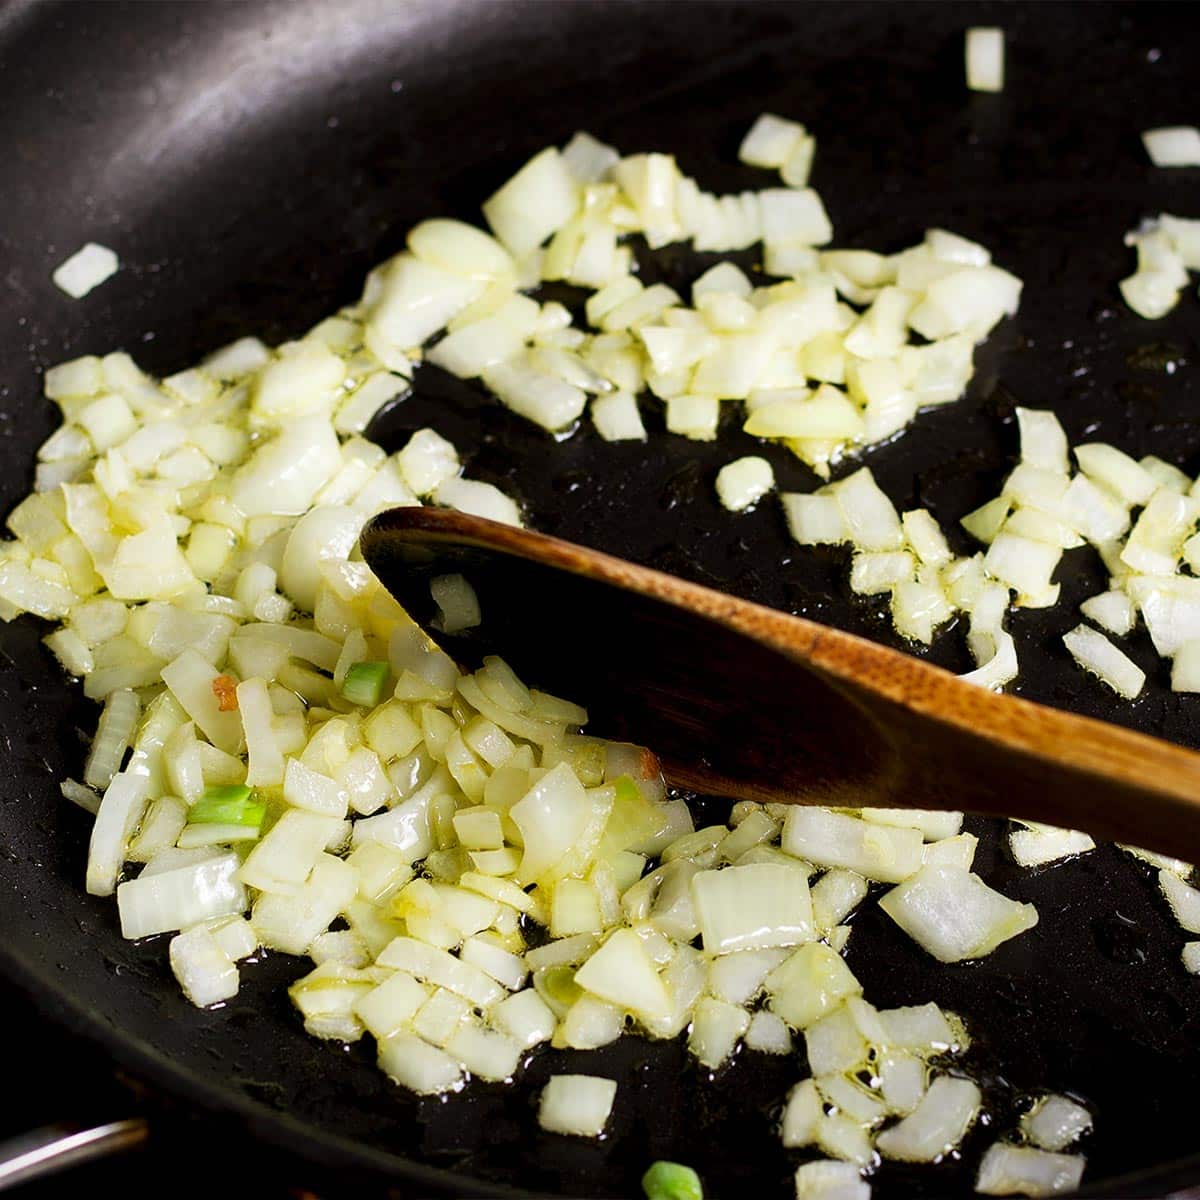 Using a wooden spoon to stir chopped onion as it cooks in a skillet.